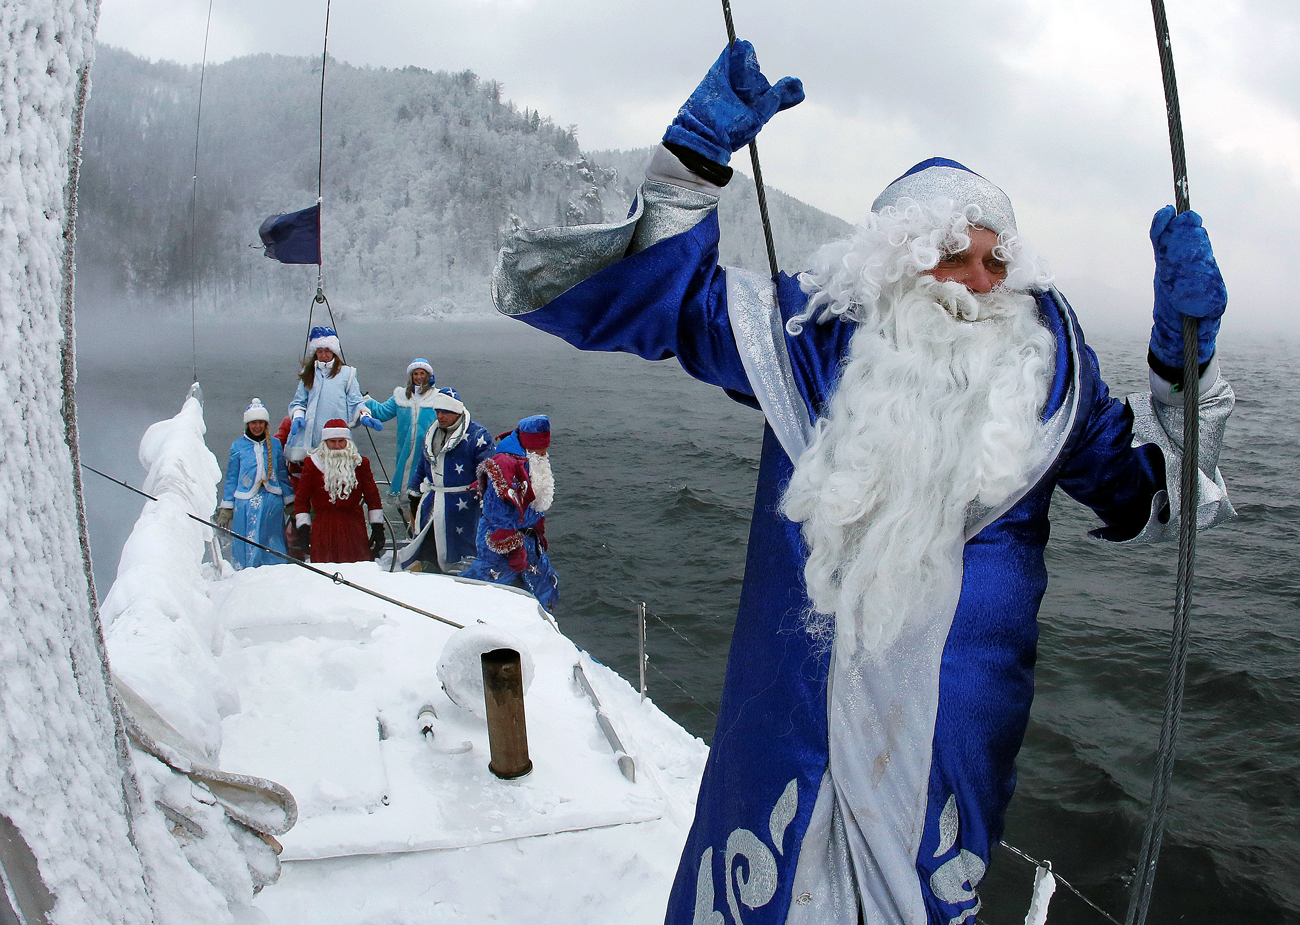 Members of the "Skipper" yacht club dressed as Ded Moroz, the Russian equivalent of Santa Claus, and his granddaughter Snegurochka (Snow Maiden) sail a yacht along the Yenisei River while marking the end of the sailboat season, with the air temperature at about minus 21 degrees Celsius (minus 5.8 degrees Fahrenheit), outside the Siberian city of Krasnoyarsk, Russia